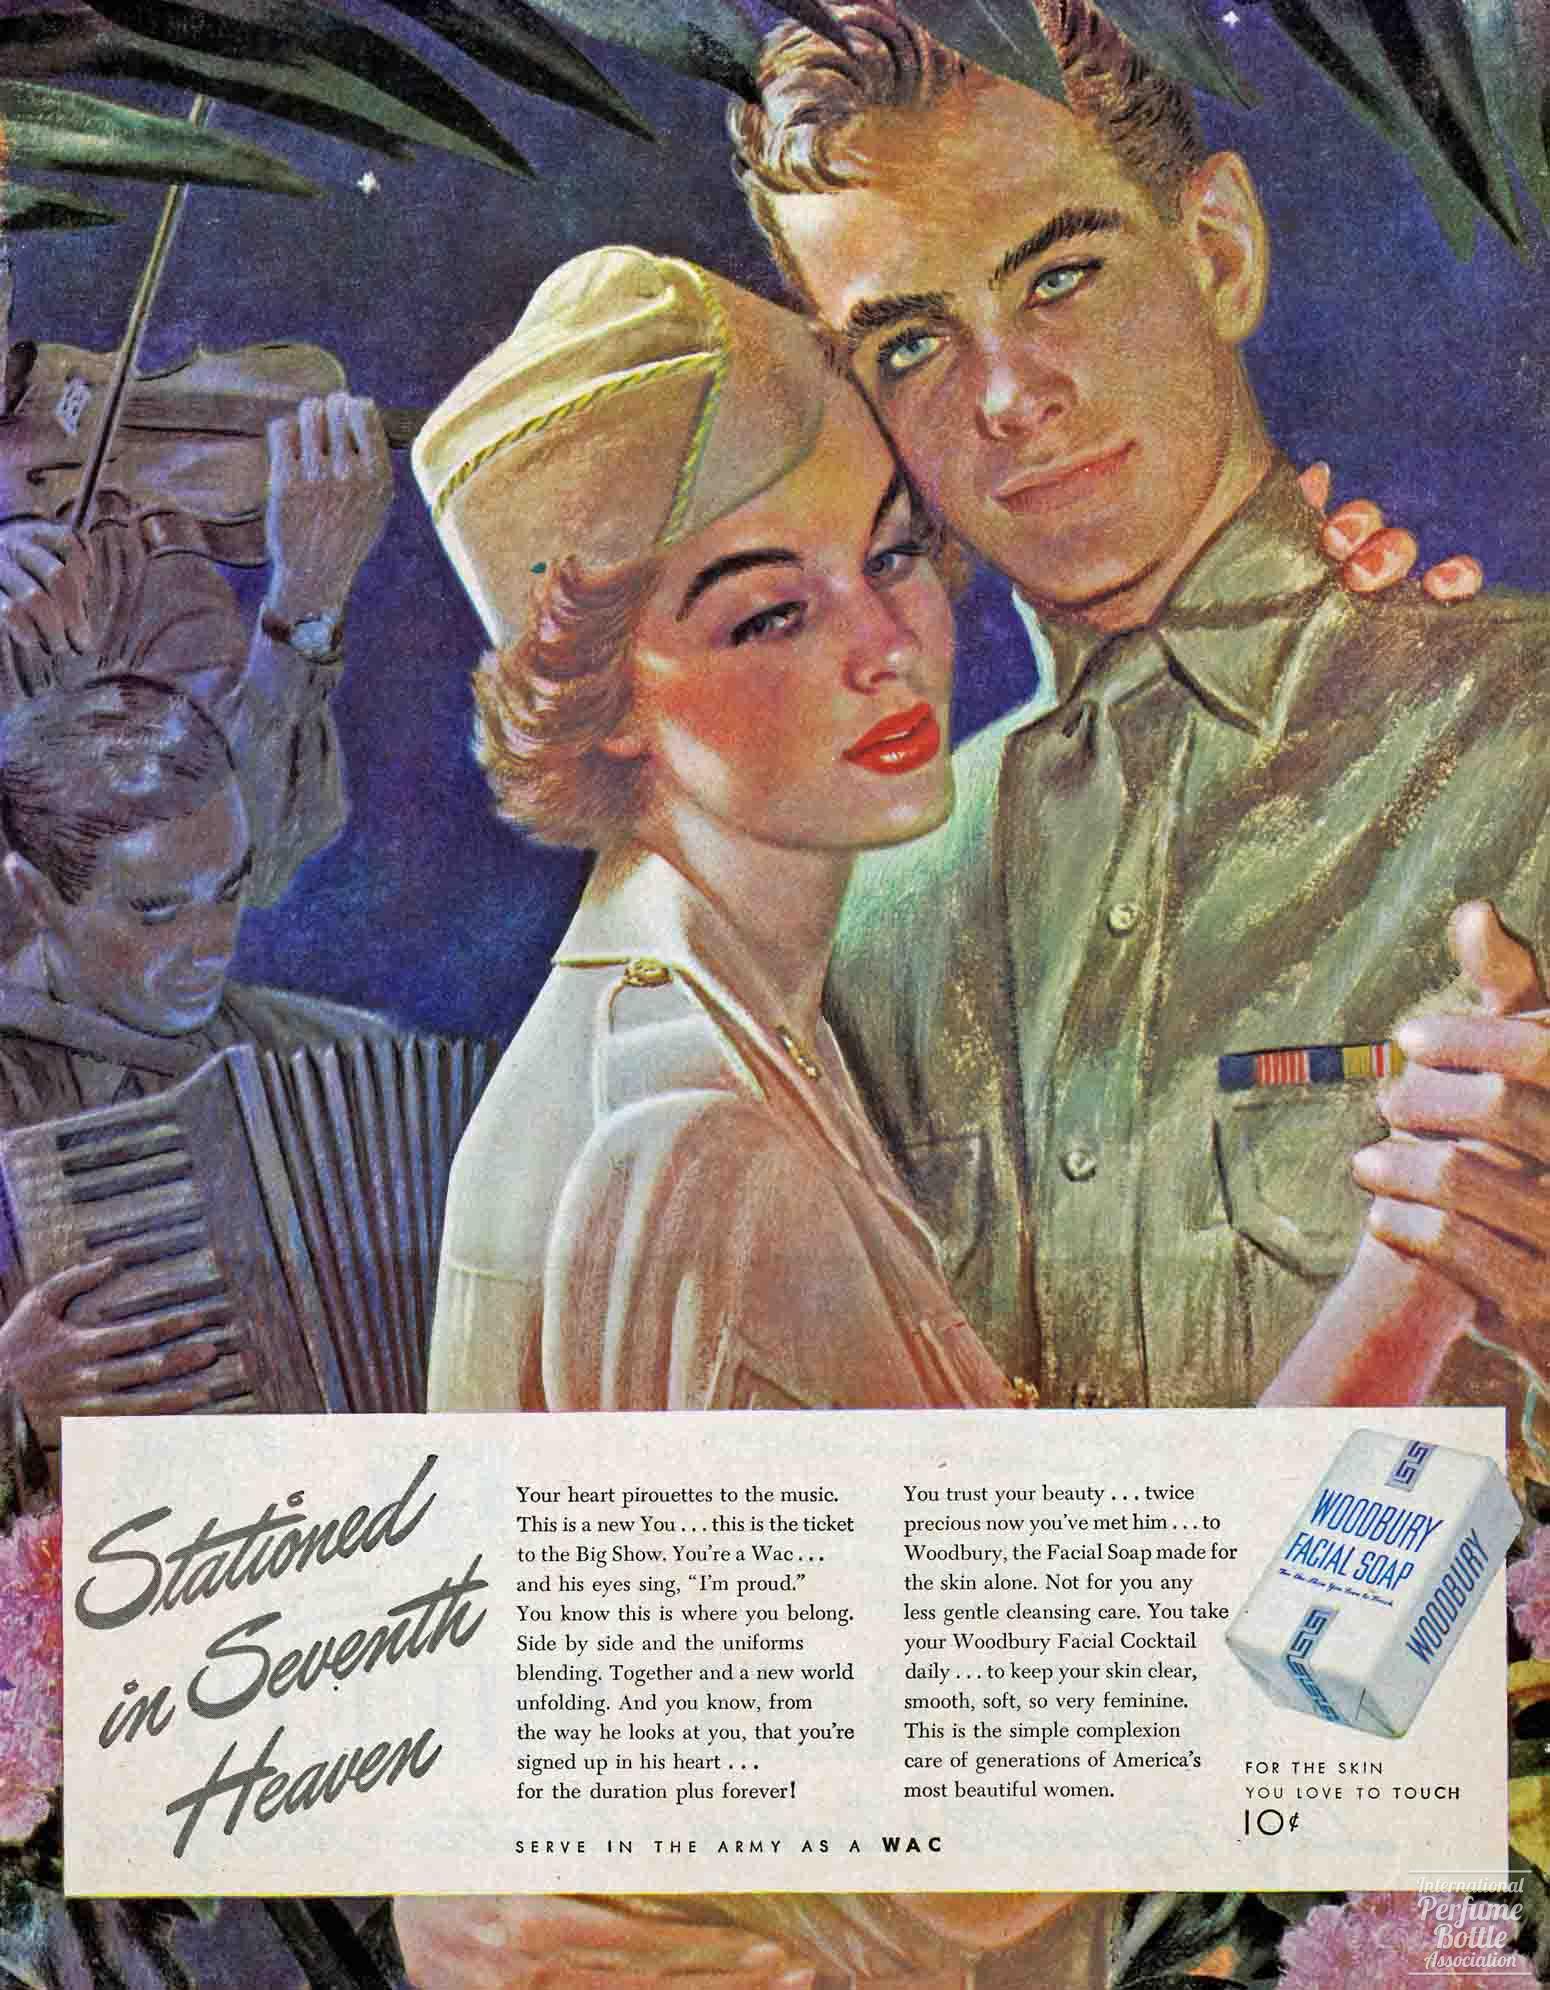 Facial Soap by Woodbury Advertisement (Army) - 1944